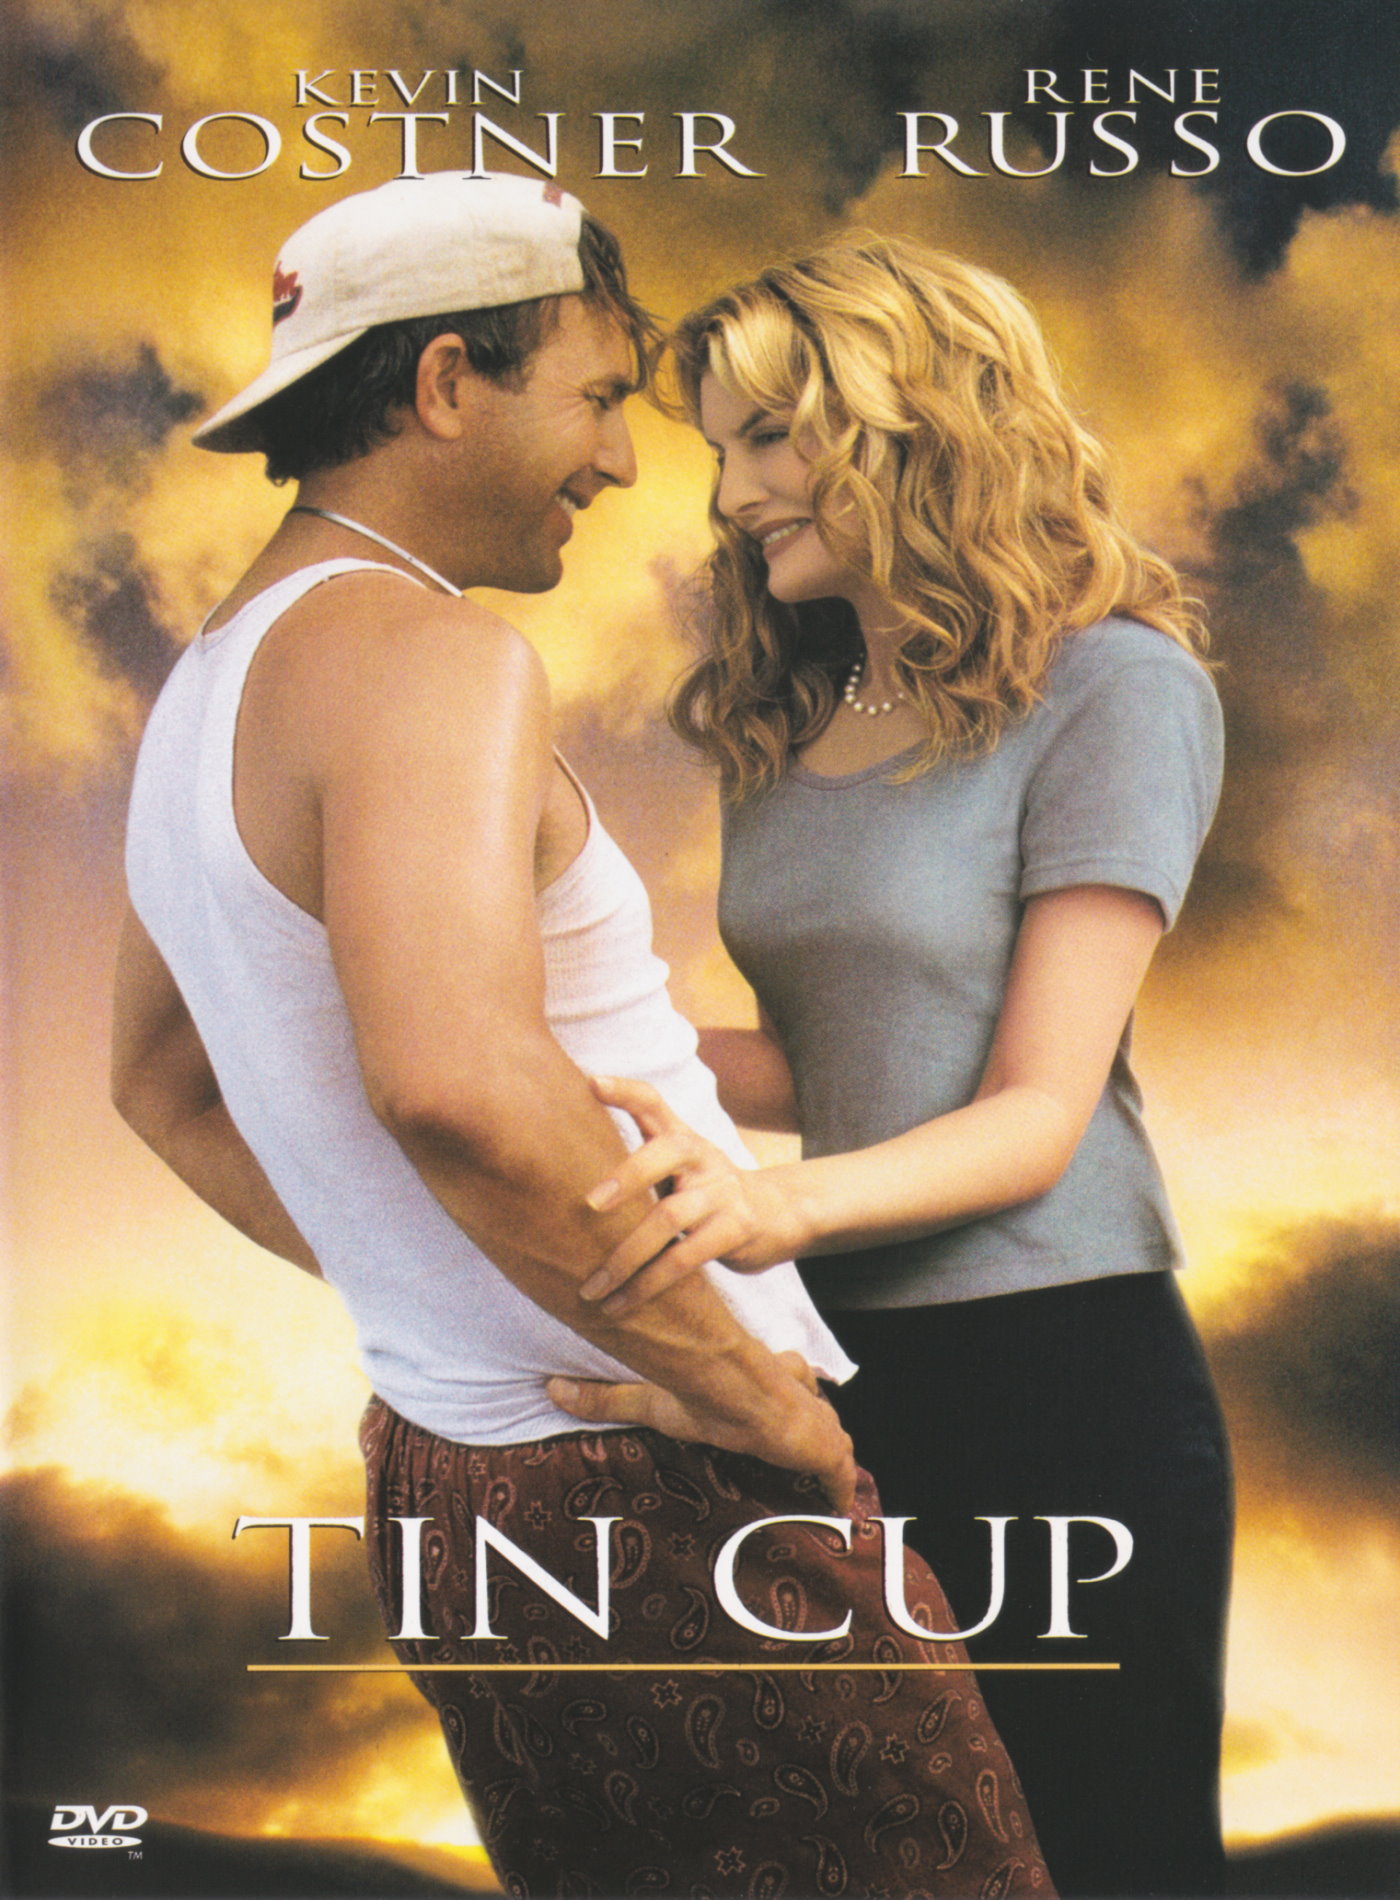 Cover - Tin Cup.jpg